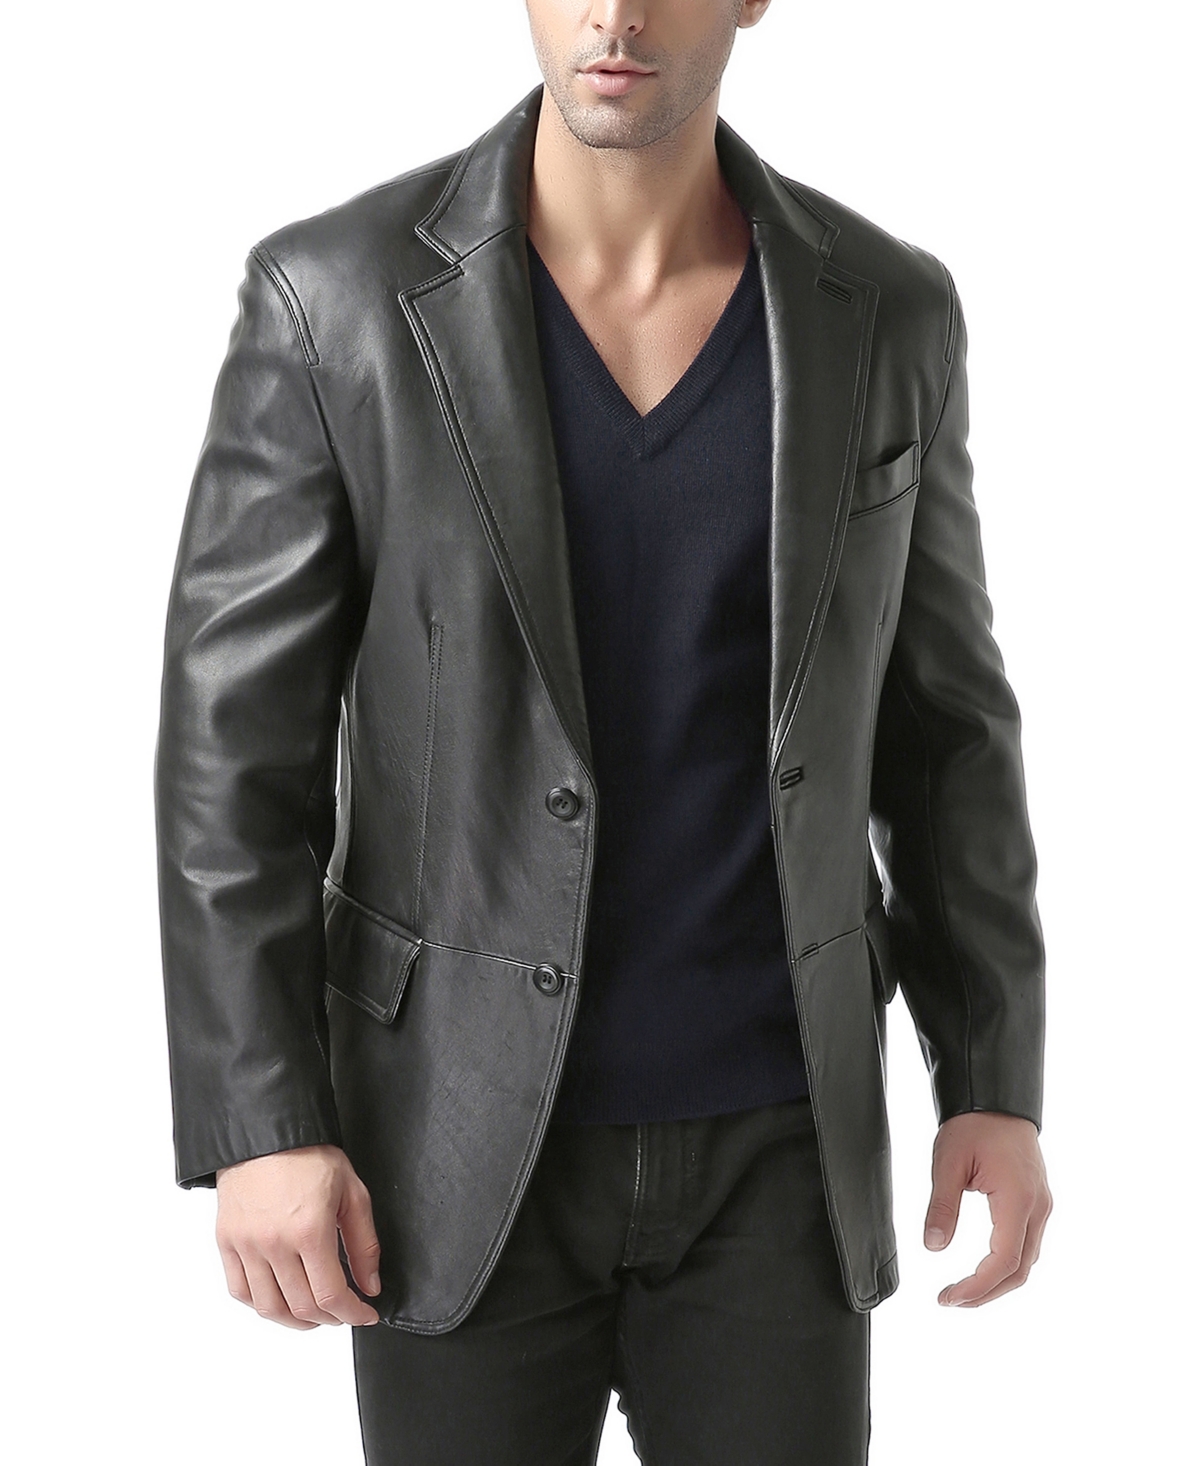 Men Two-Button Leather Blazer - Big and Tall - Cognac